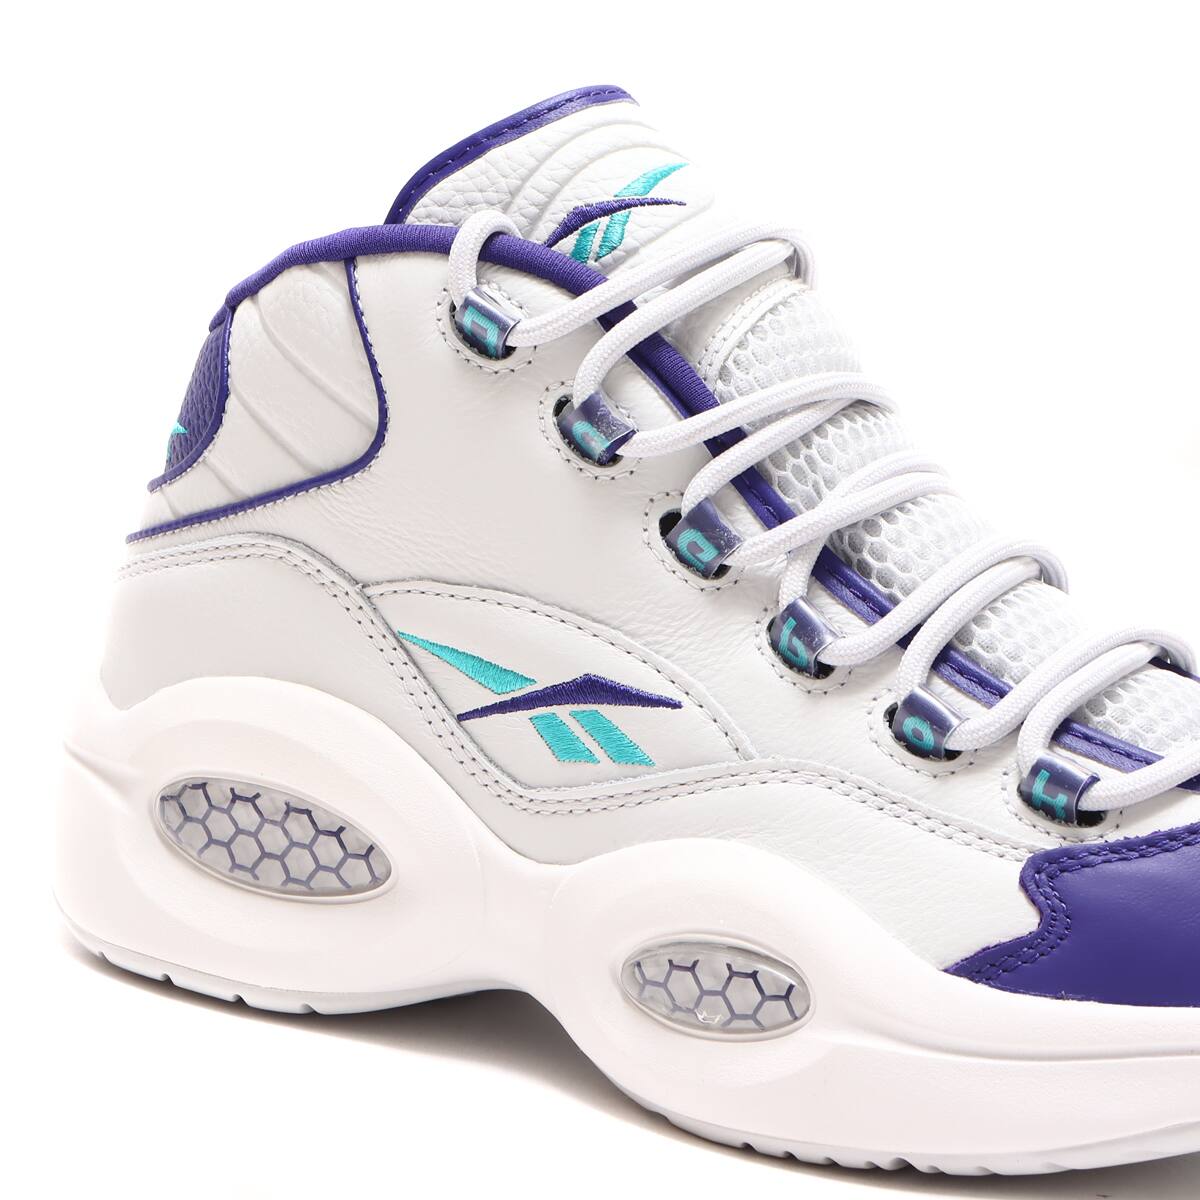 Reebok QUESTION MID COLD GRAY/BOLD PURPLE/CLASSIC TEAL 22FW-S